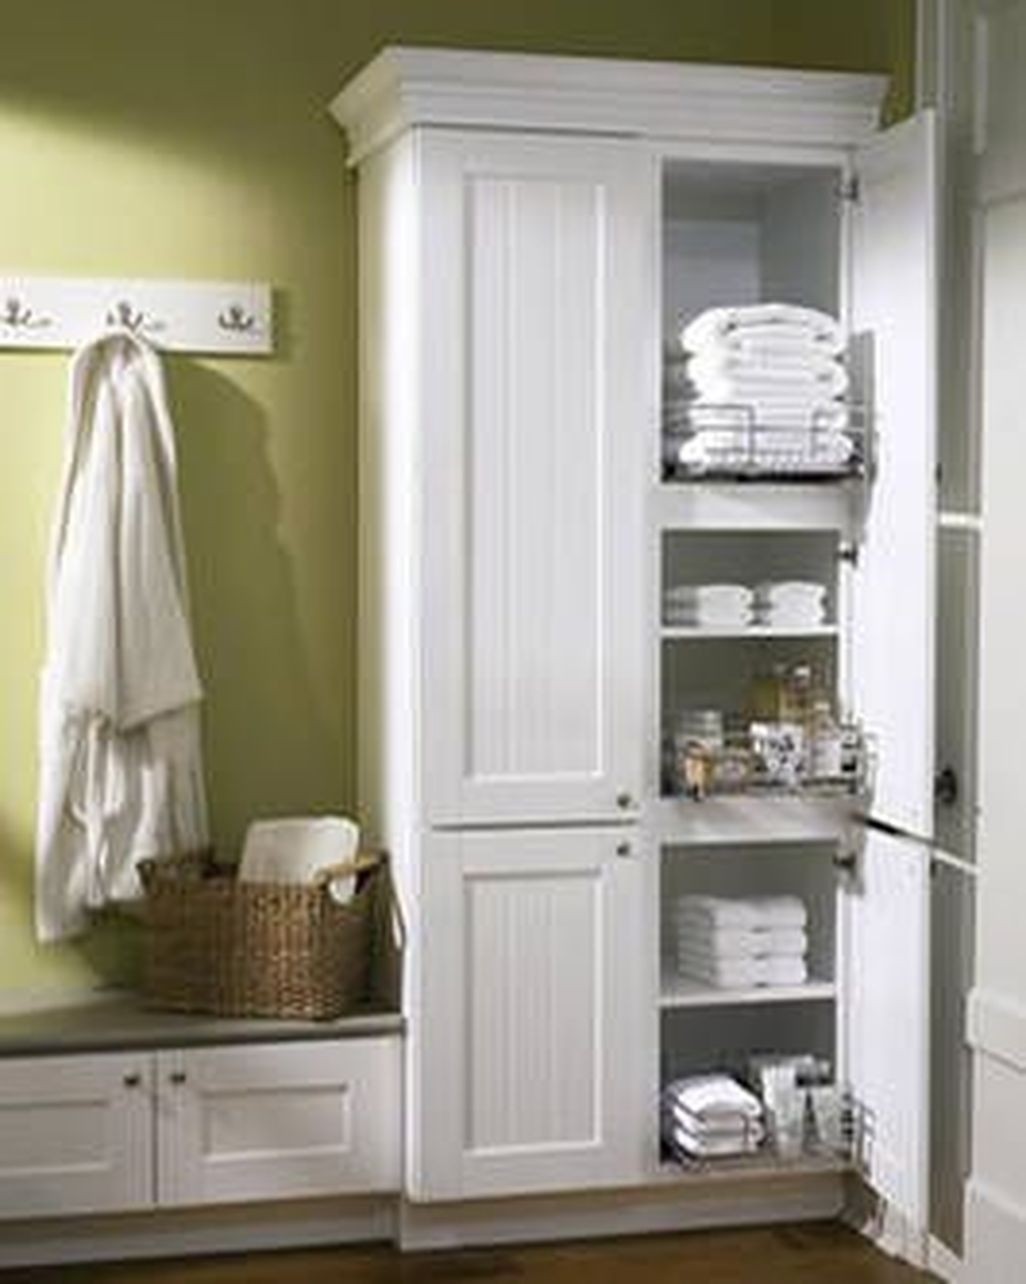 Free standing linen cabinets